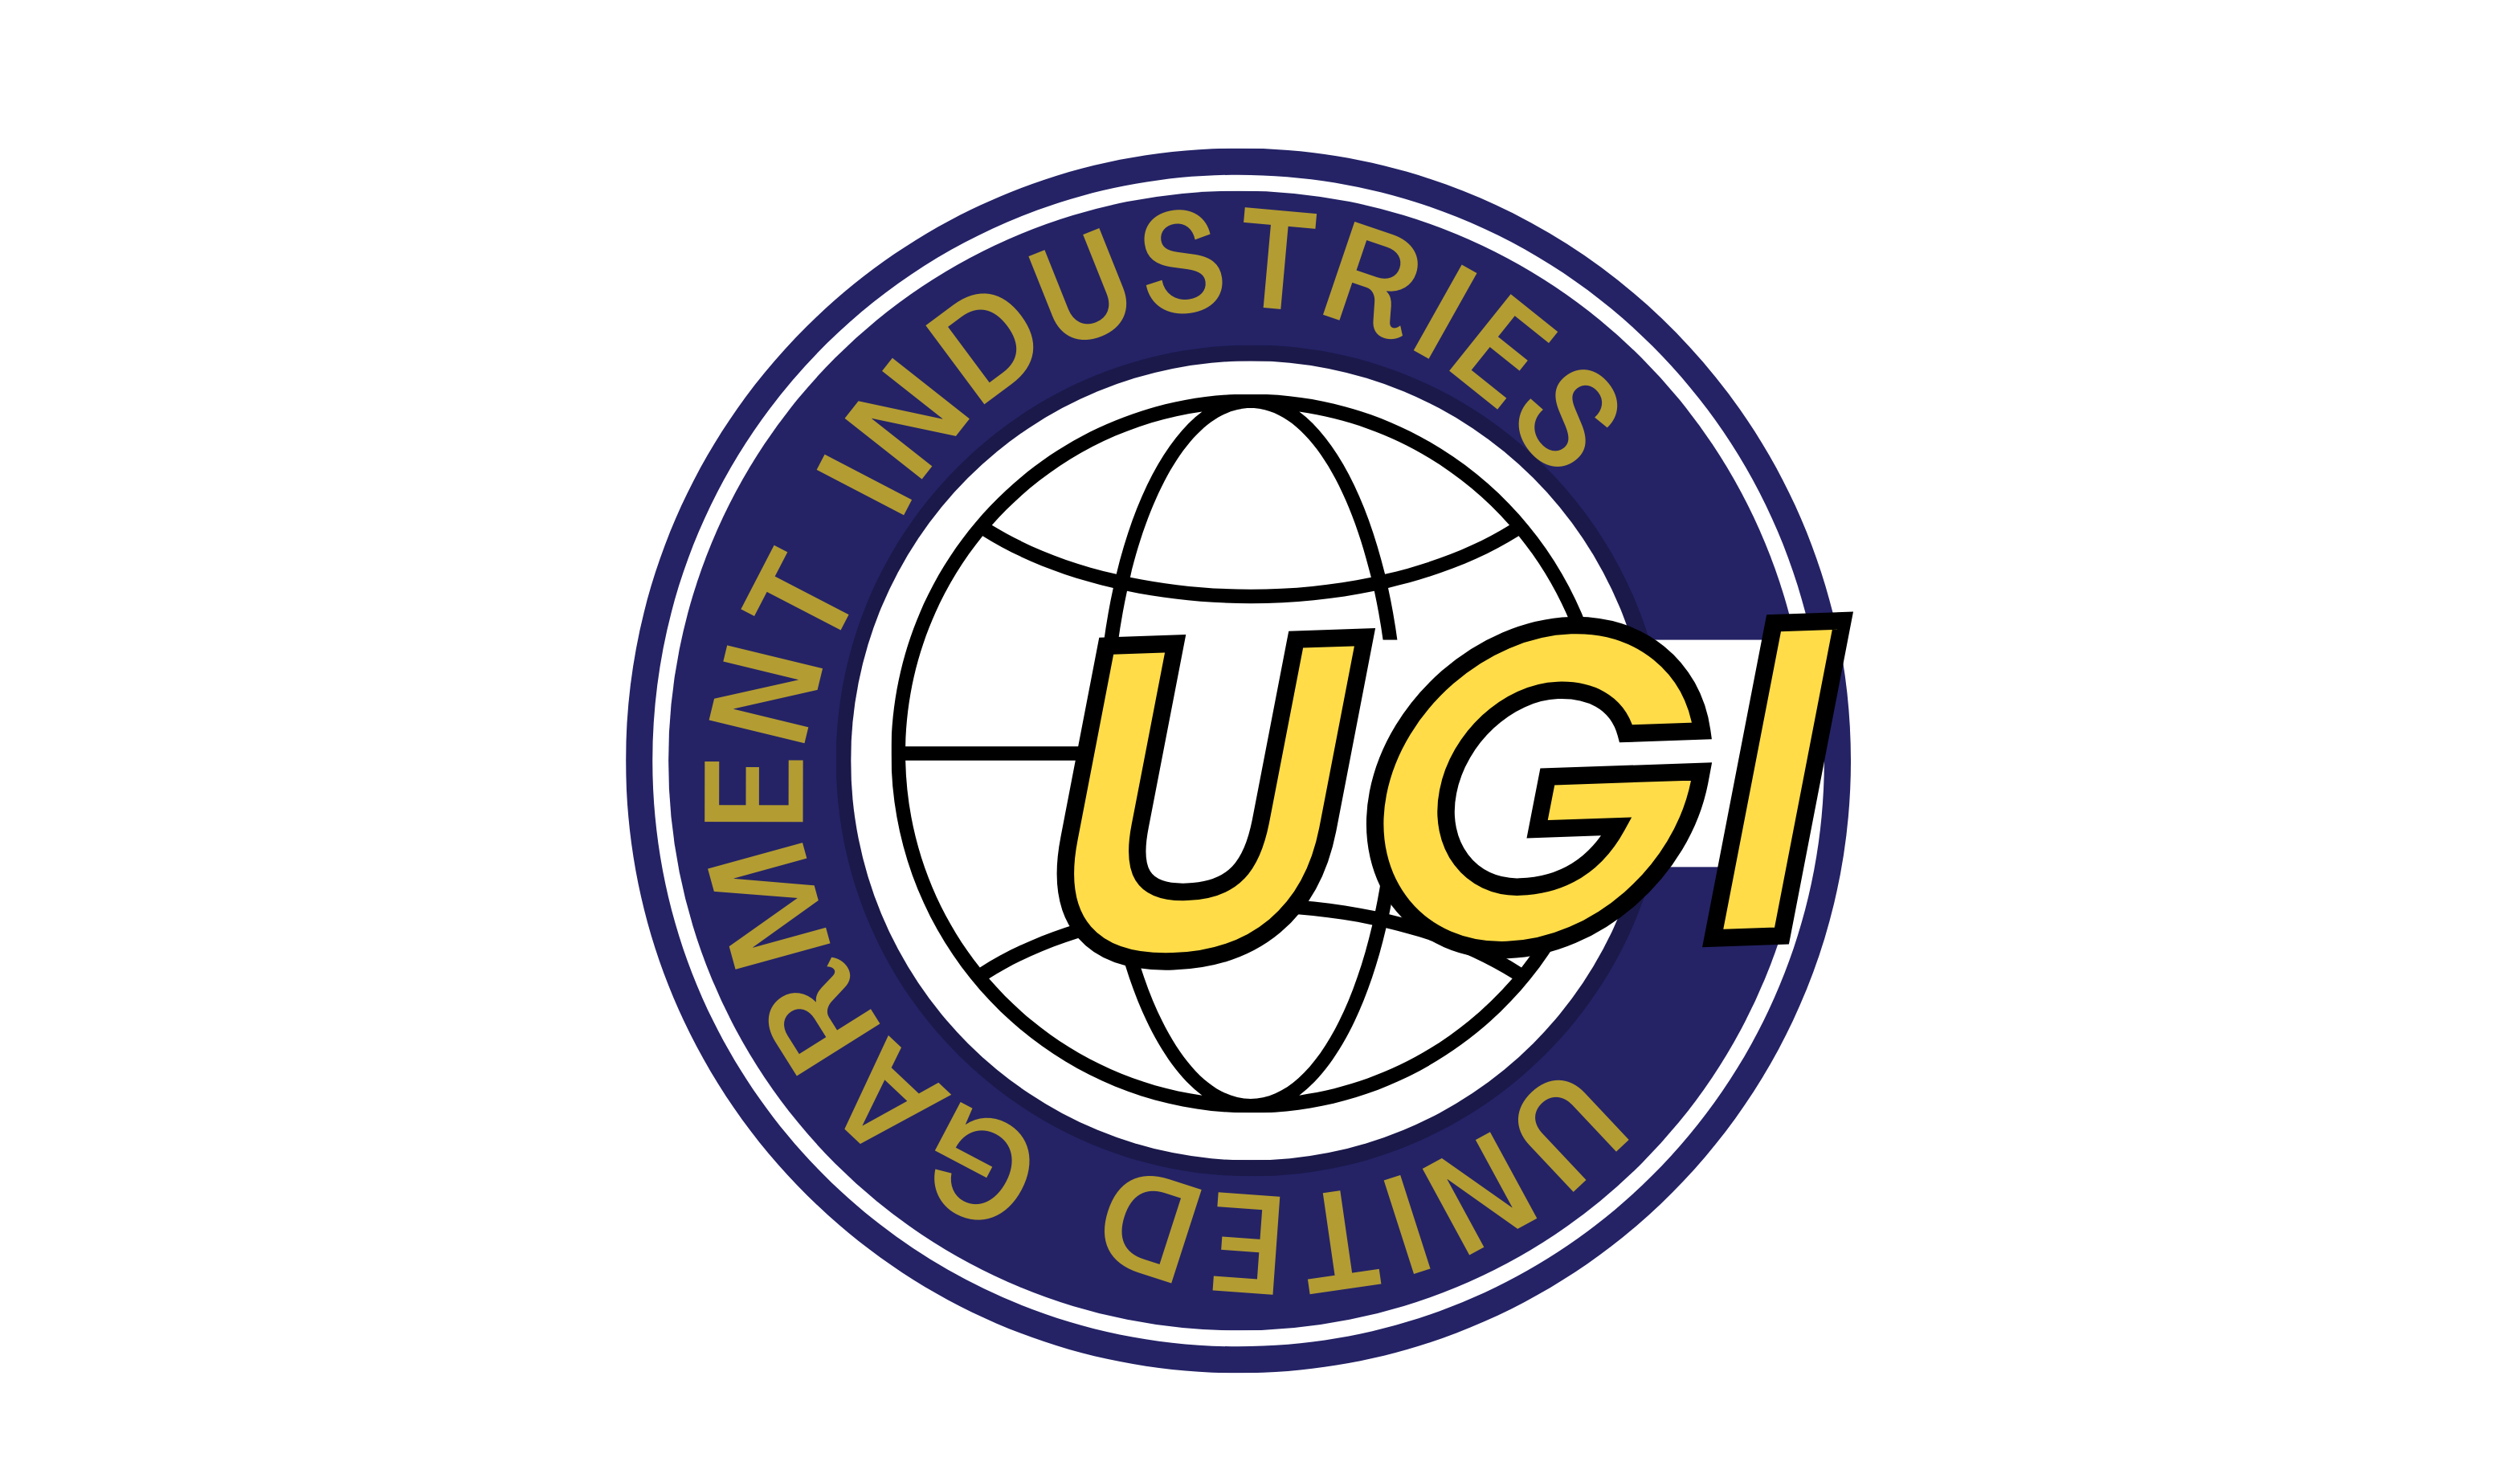 United Garment Industries Manufacturers of garments since year 2000